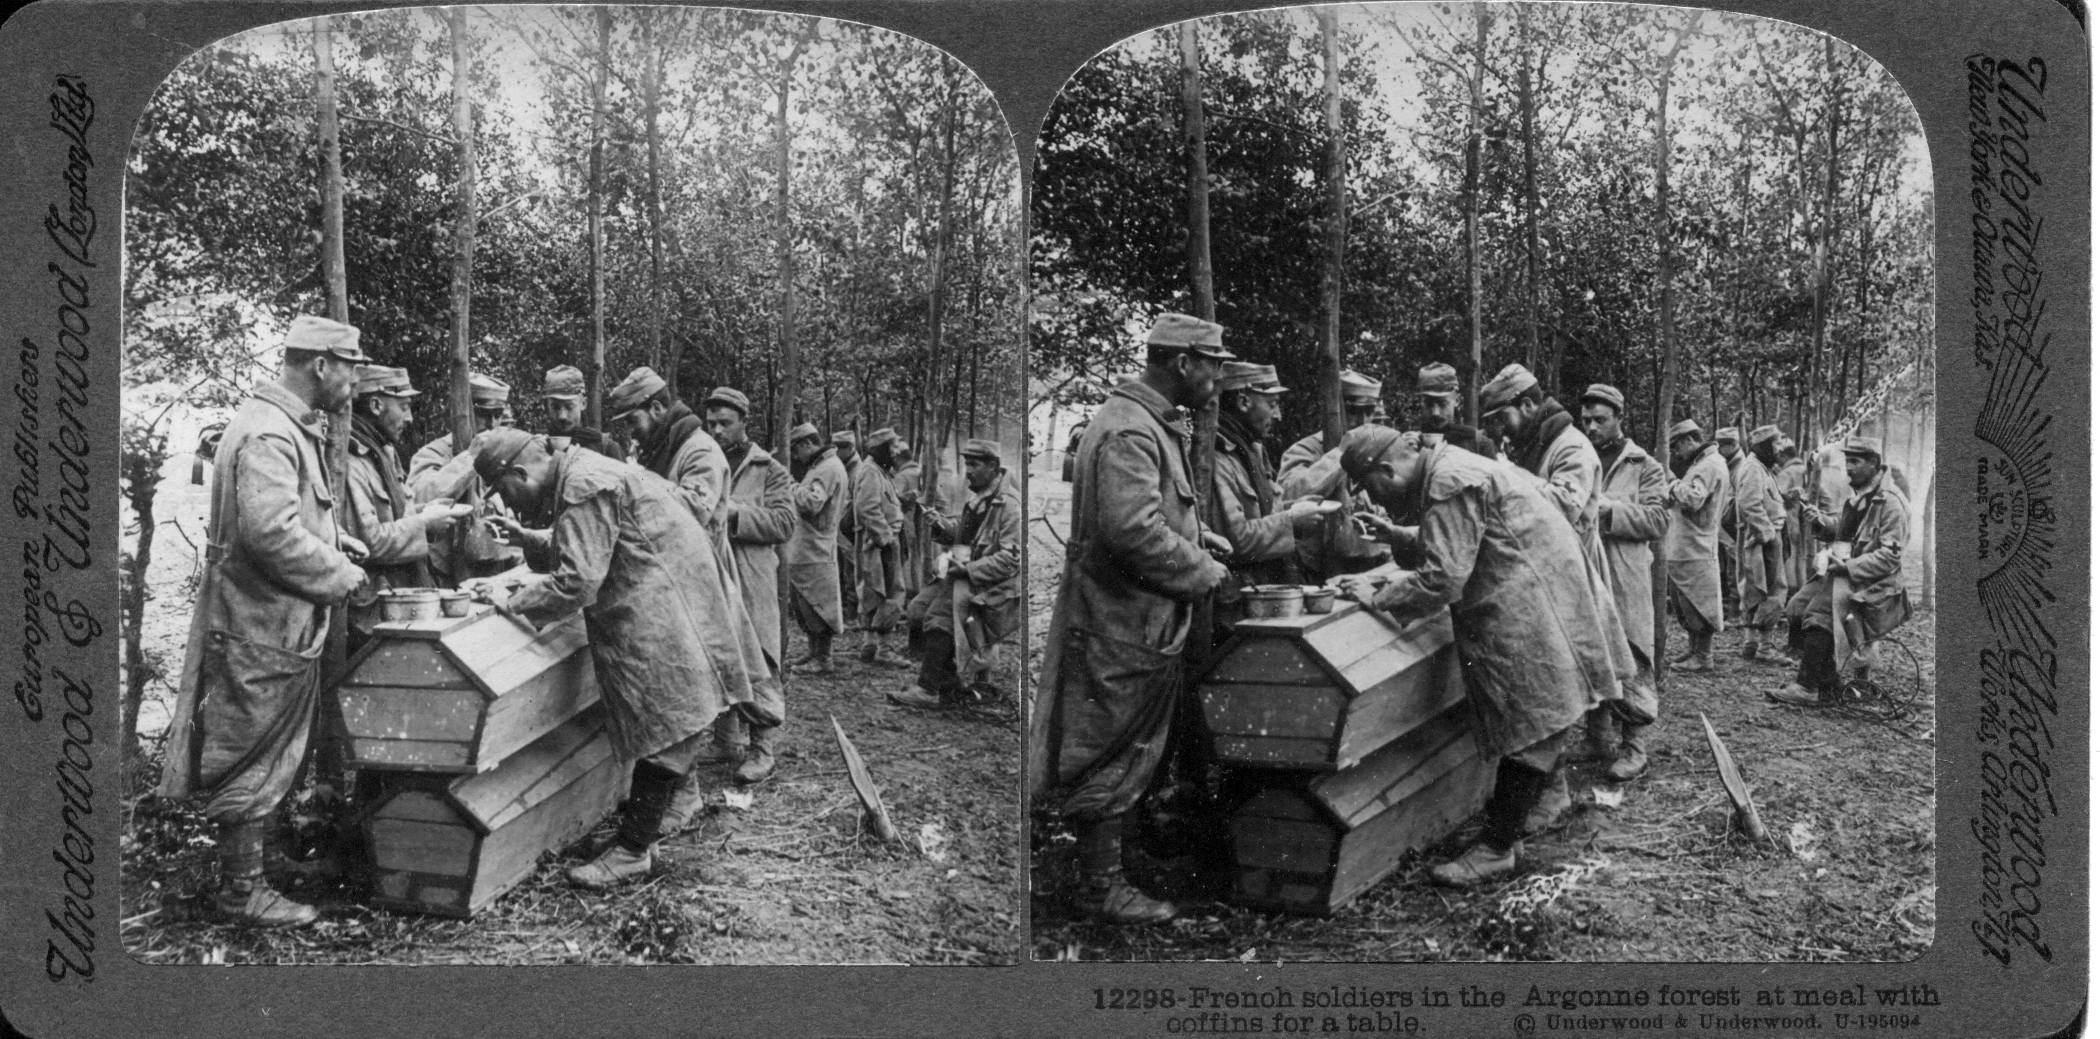 French soldiers in the Argonne forest at meal with coffins for a table